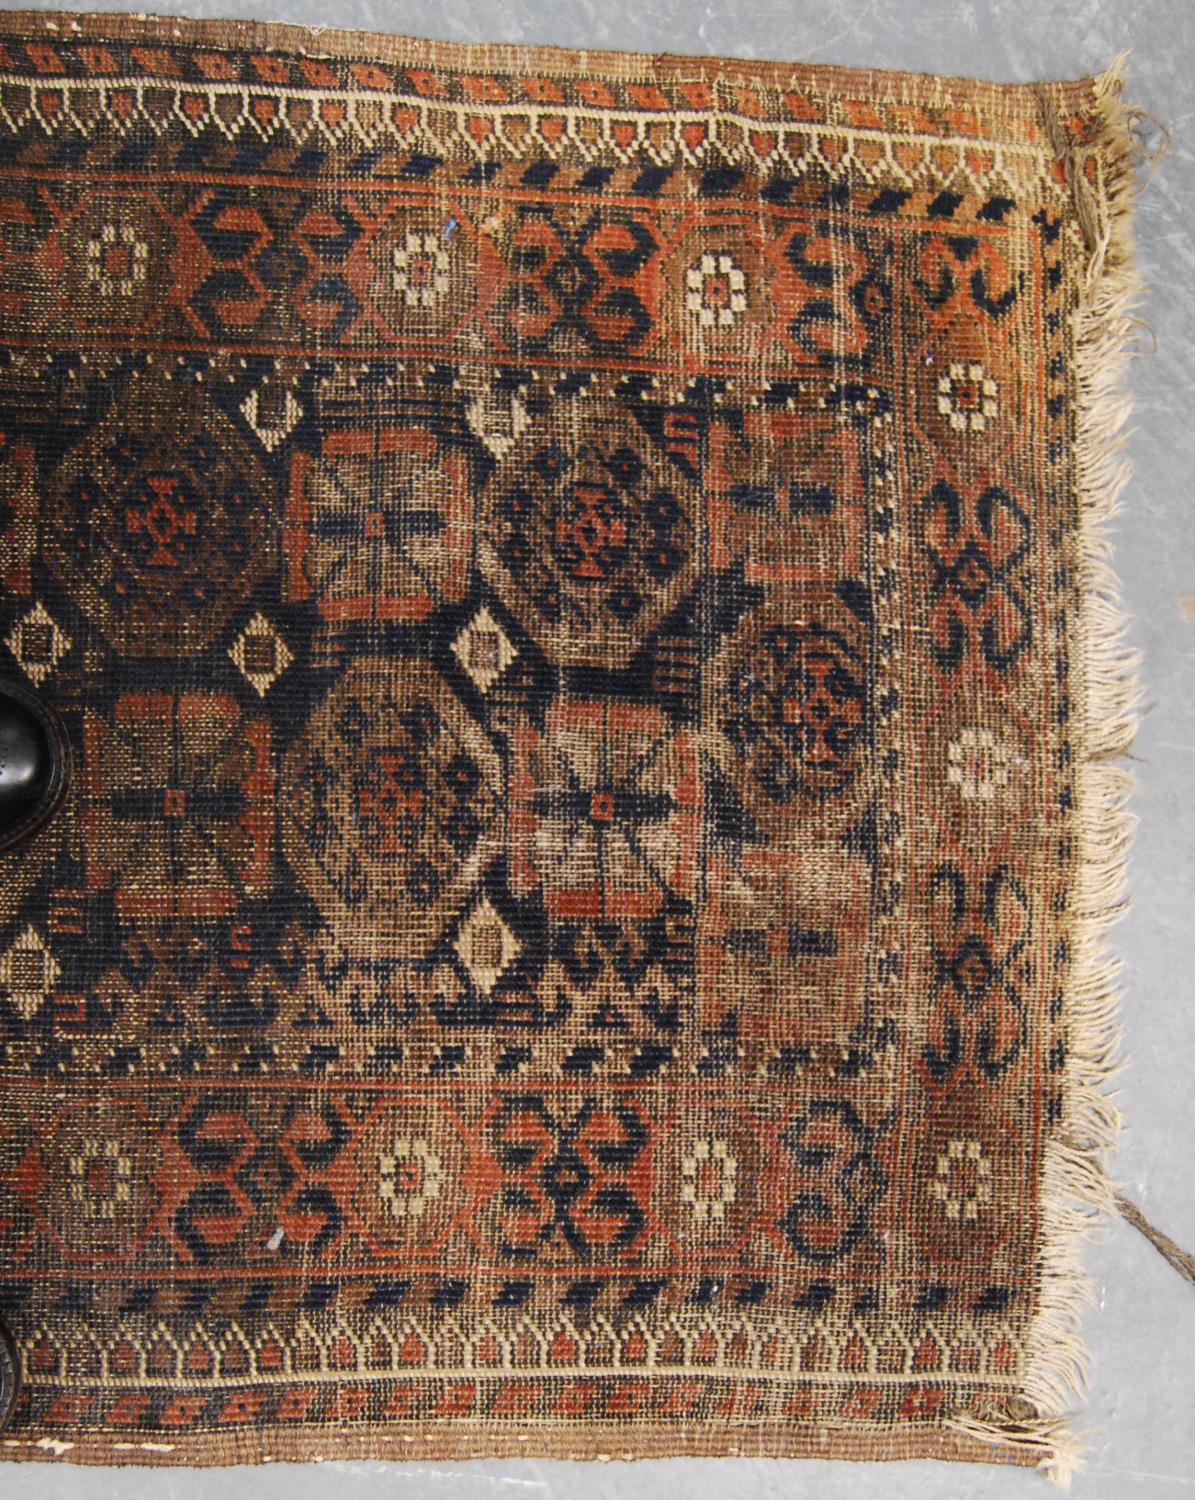 Eastern rug with two rows of eleven rosettes over faded brown ground, and triple border, 142cm x - Image 2 of 4